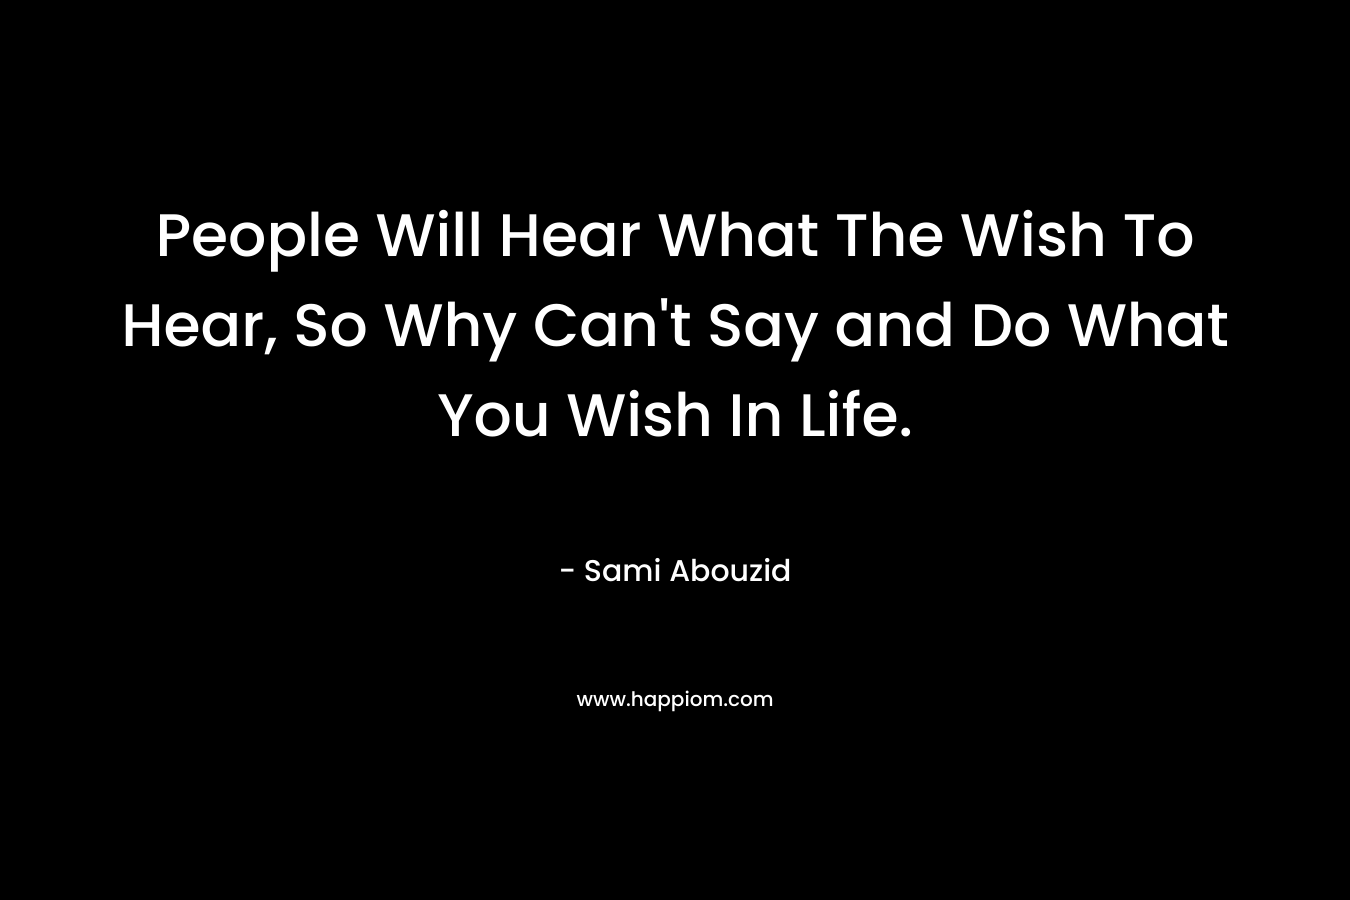 People Will Hear What The Wish To Hear, So Why Can't Say and Do What You Wish In Life.